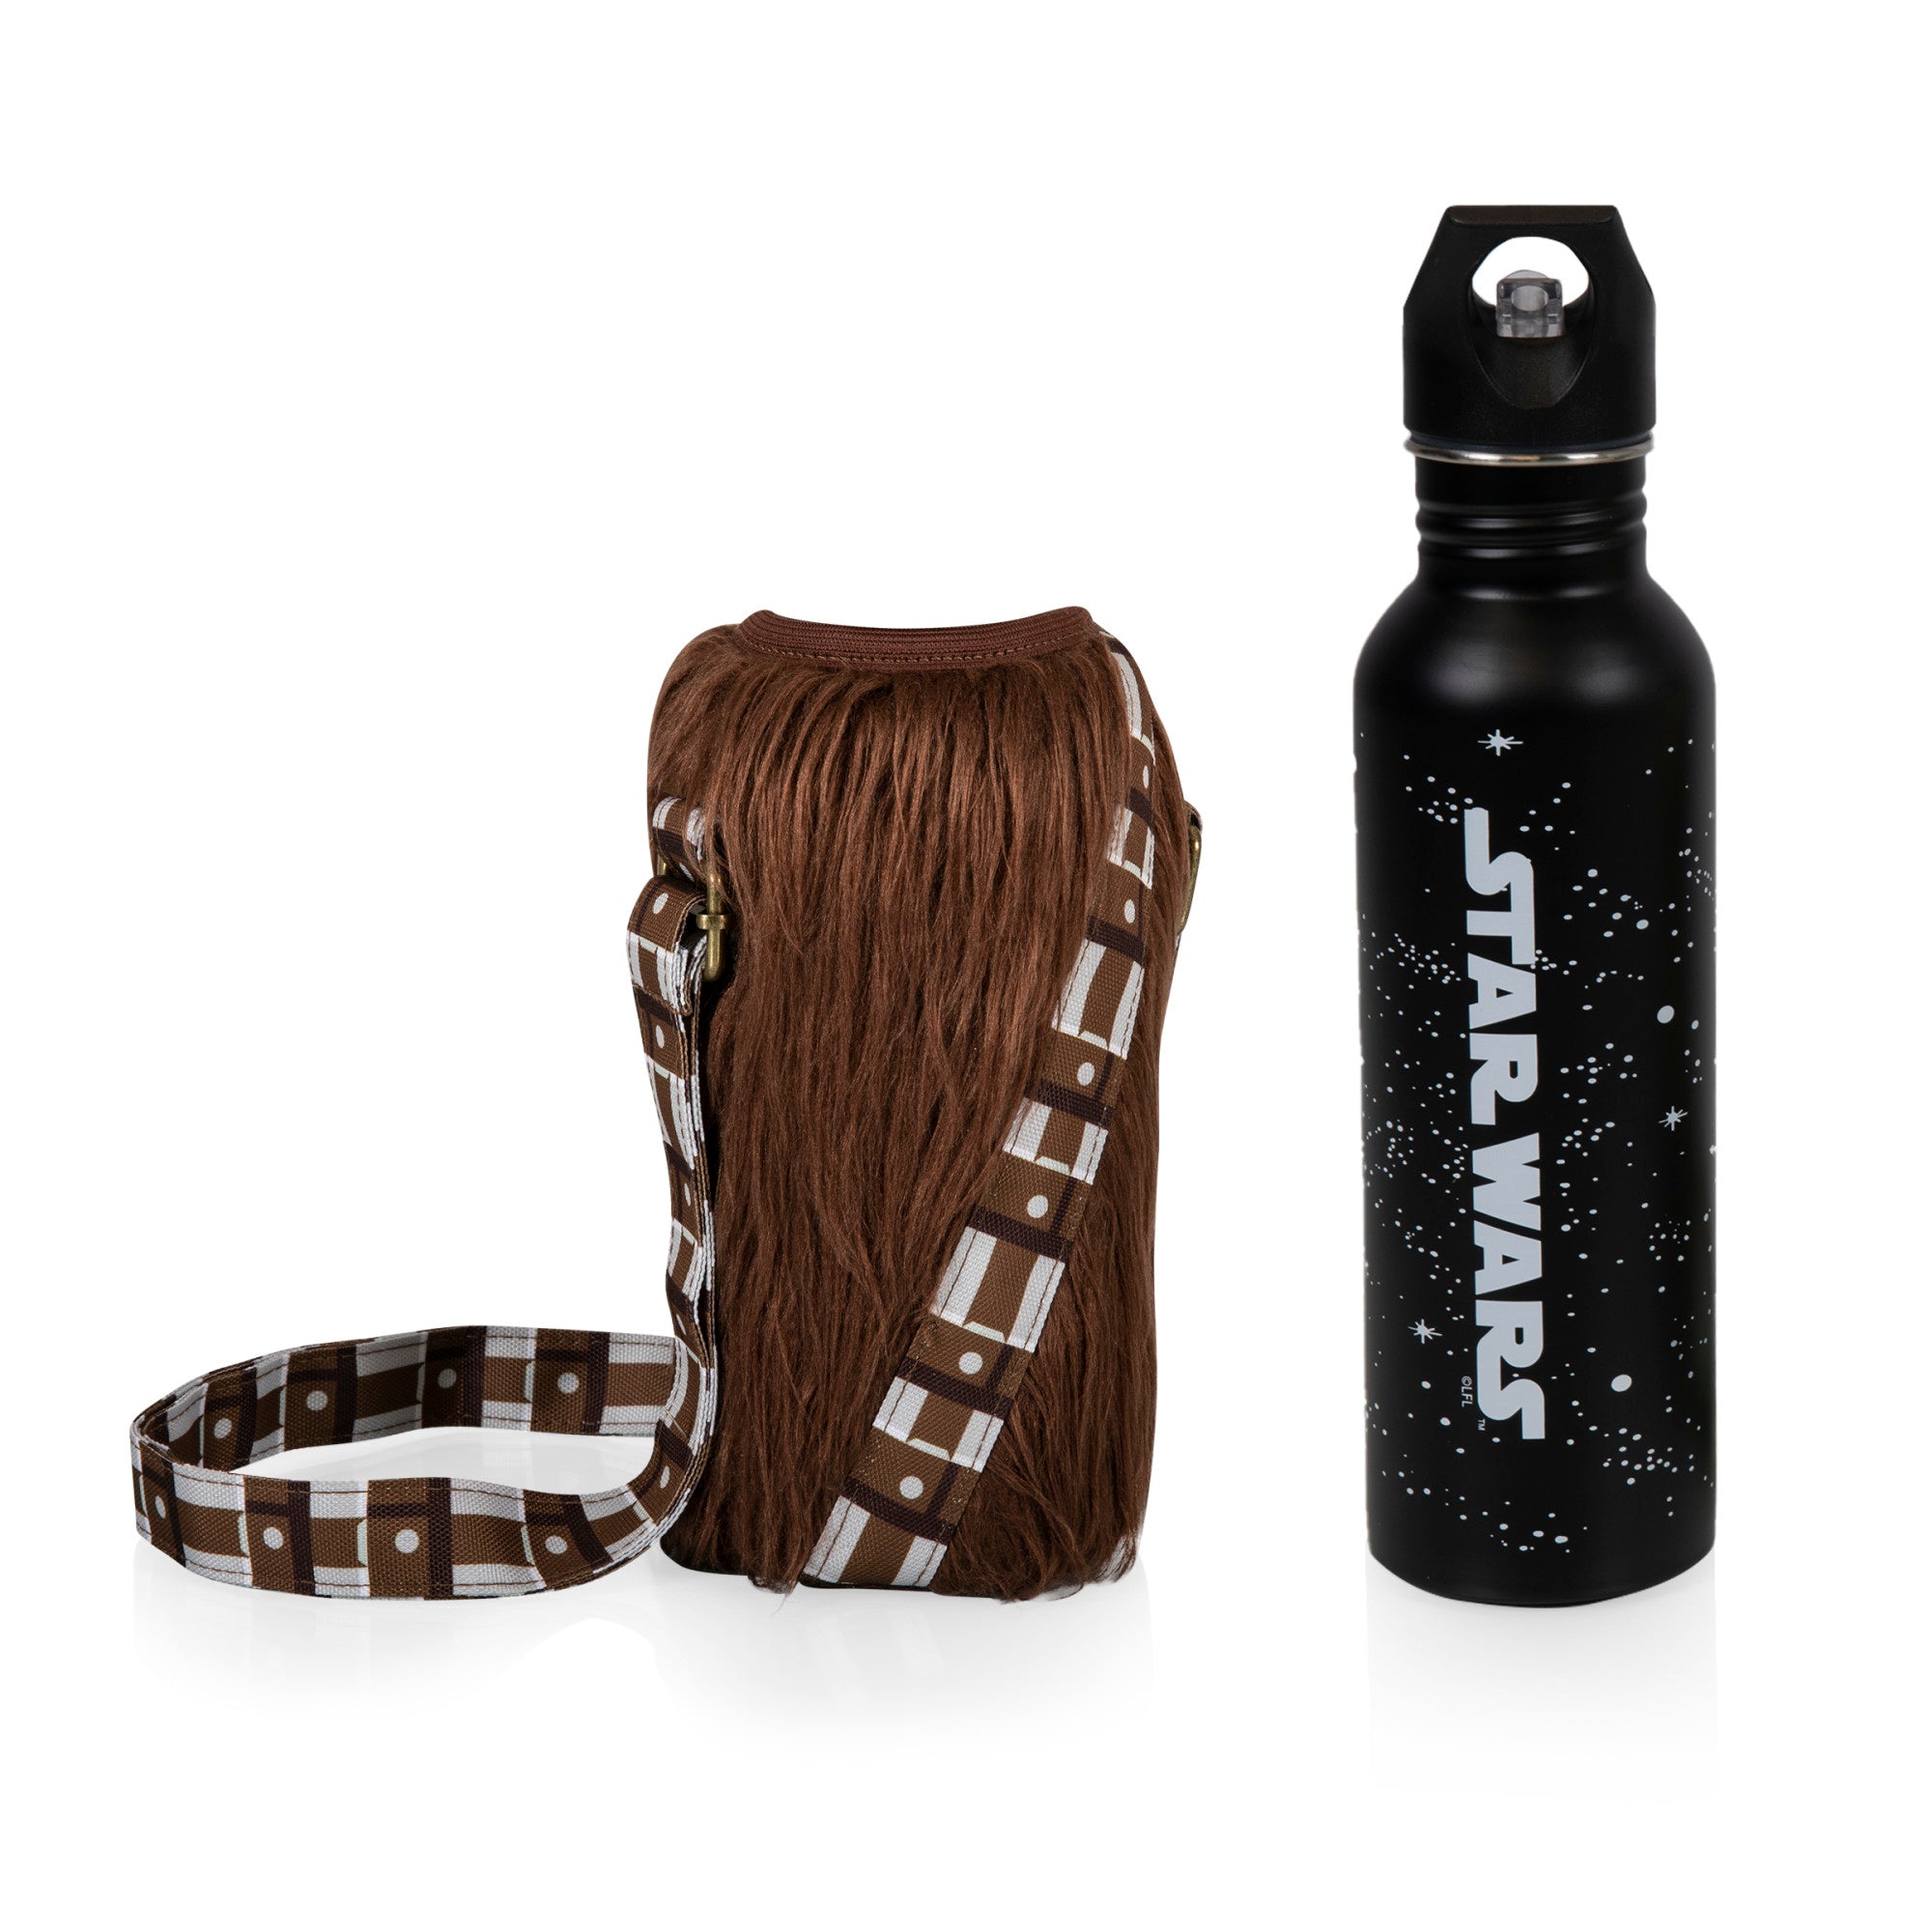 Star Wars Chewbacca - Bottle Cooler with Bottle